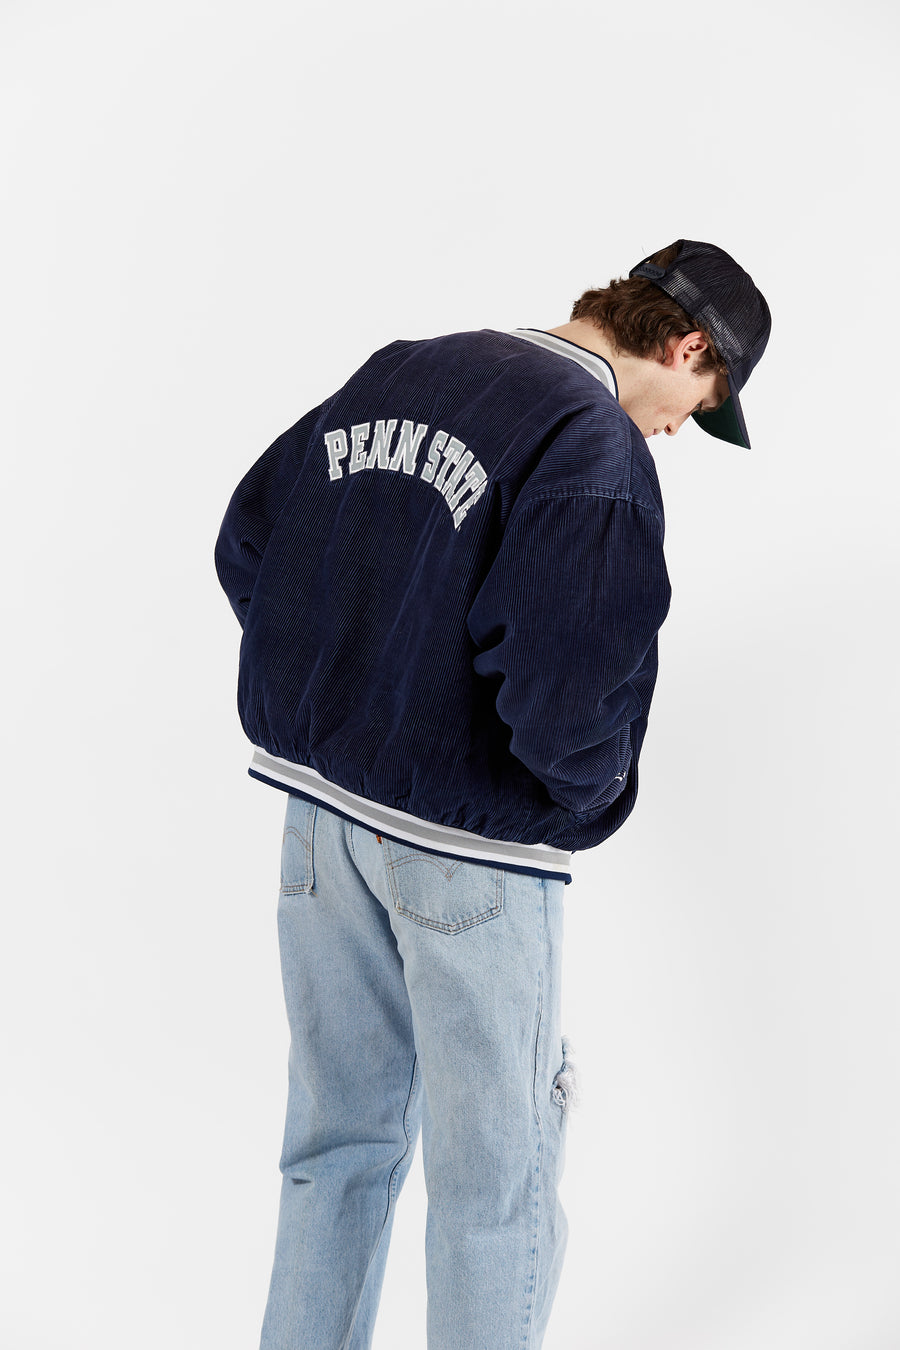 Penn State Nittany Lions Corduroy Bomber Jacket in a vintage style from thrift store Twise Studio